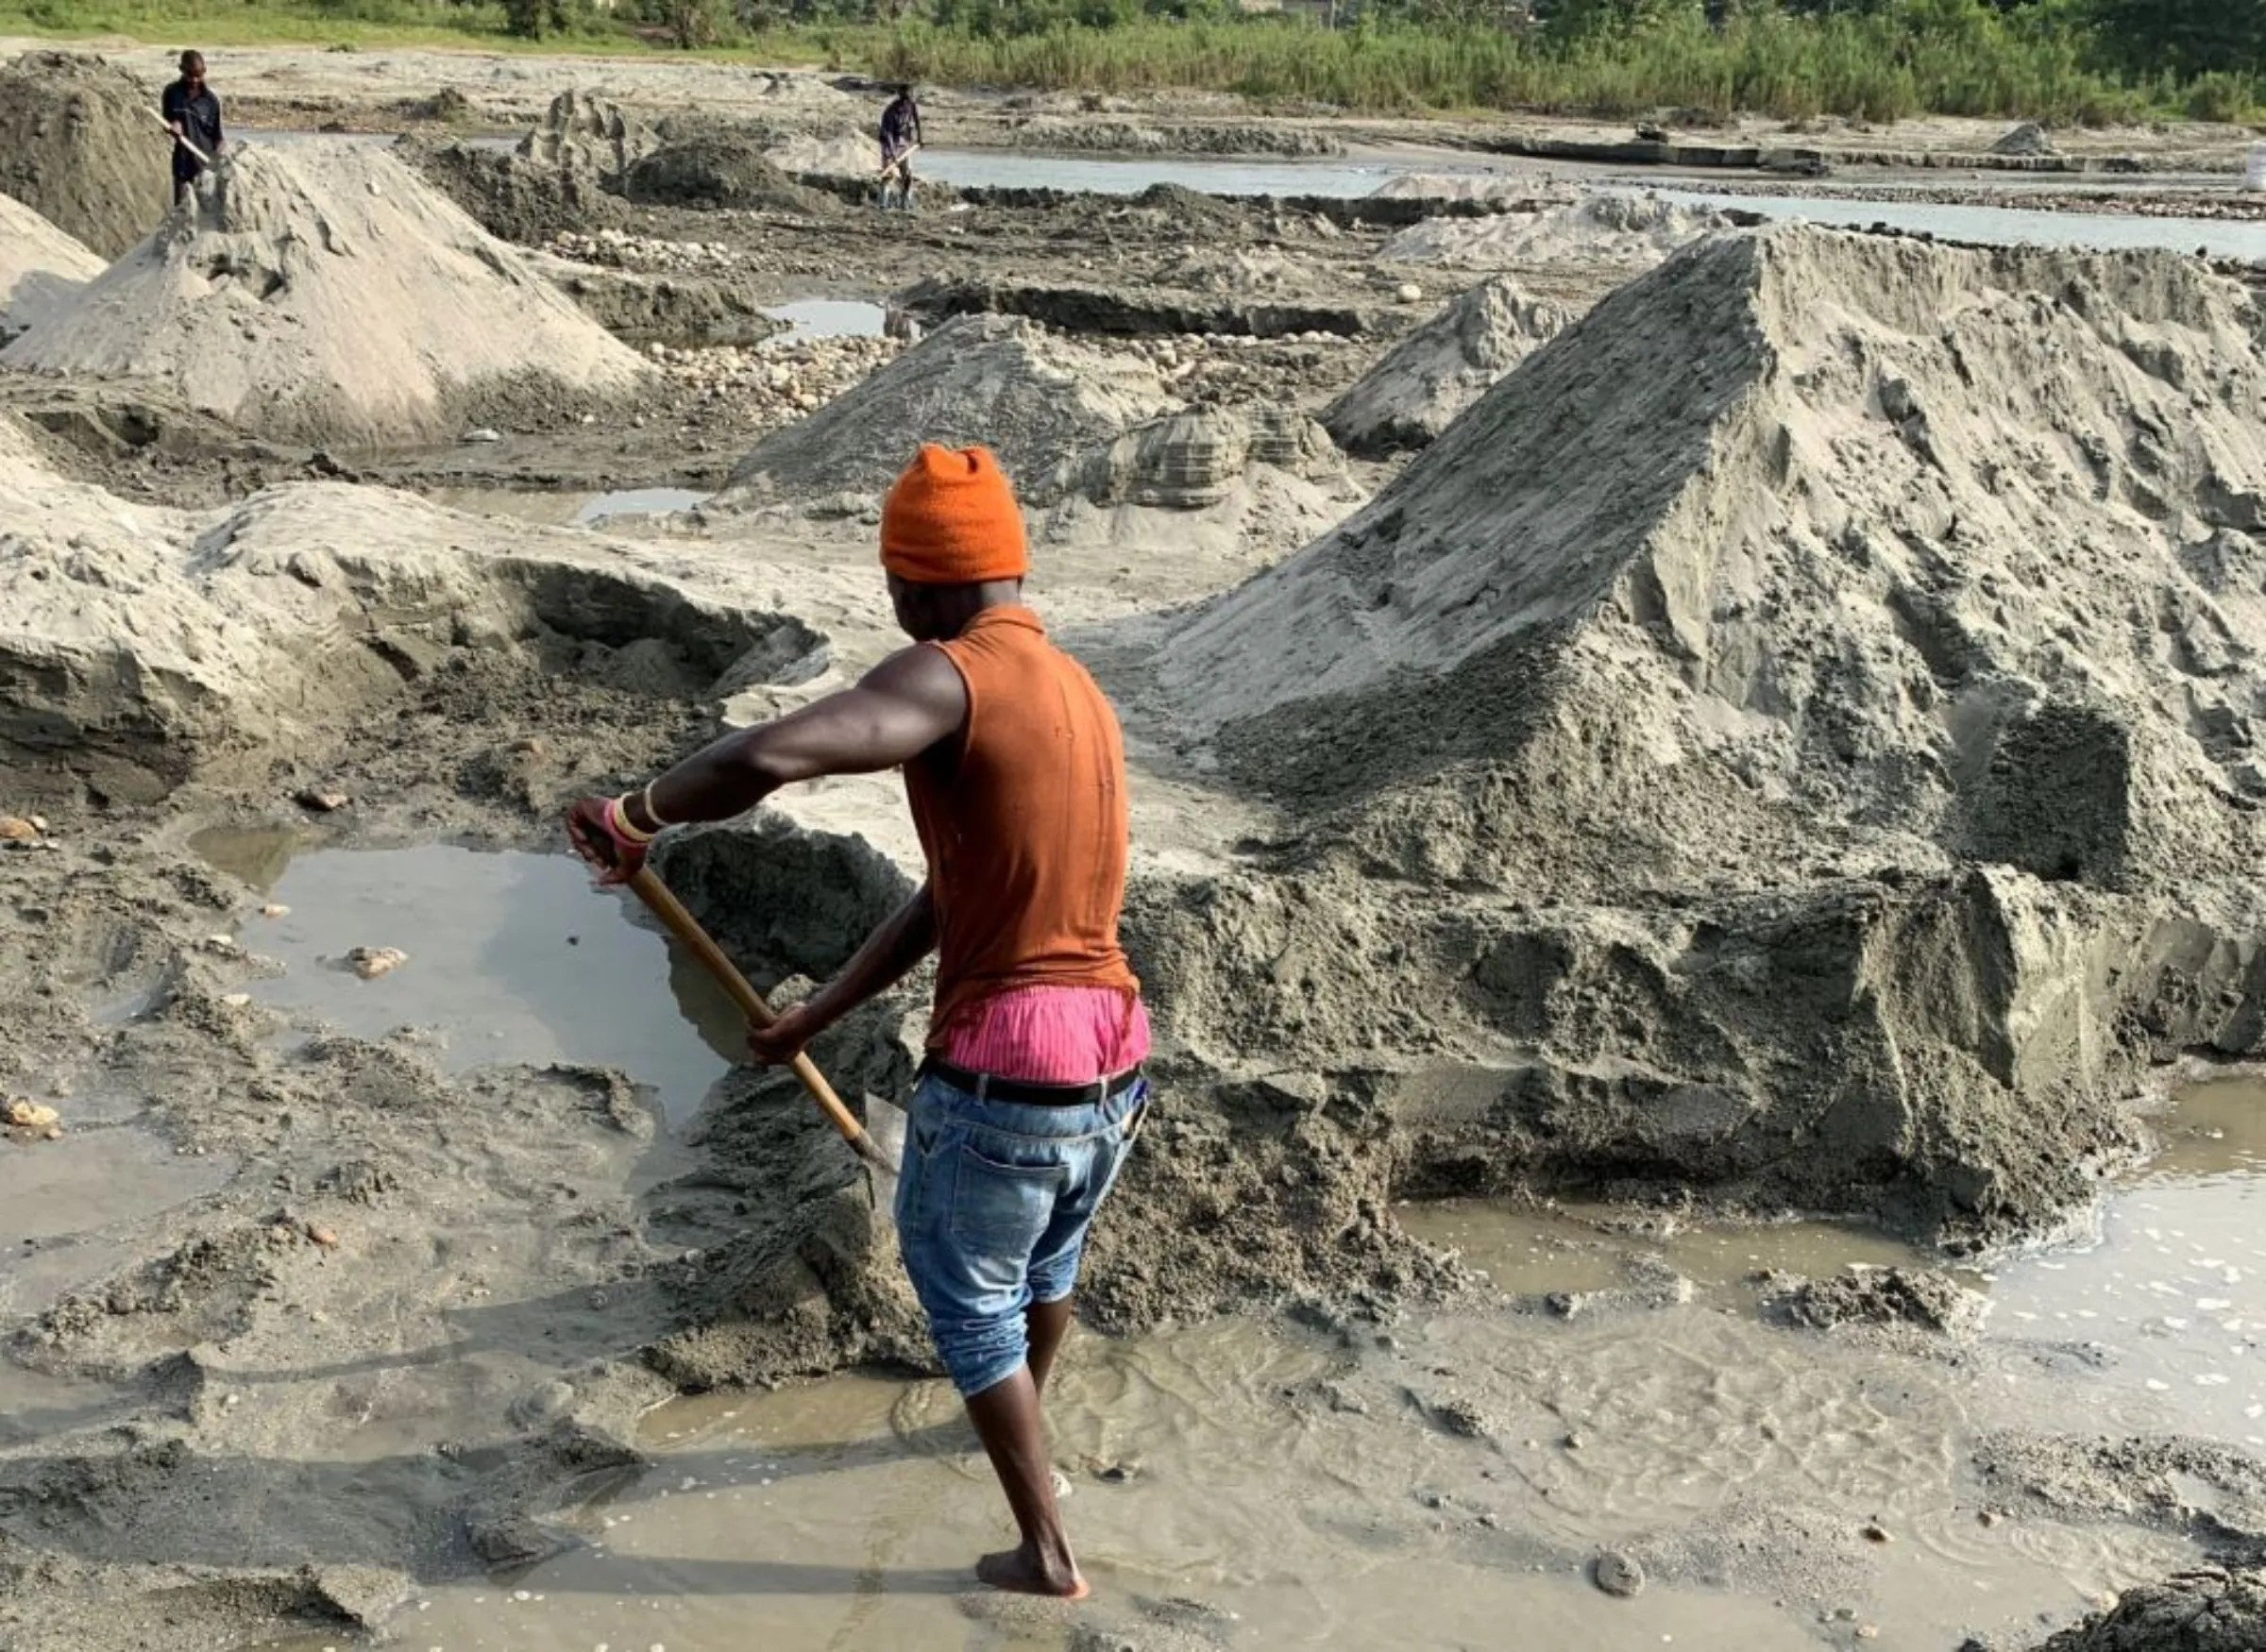 A man mines sand along the river in Uganda